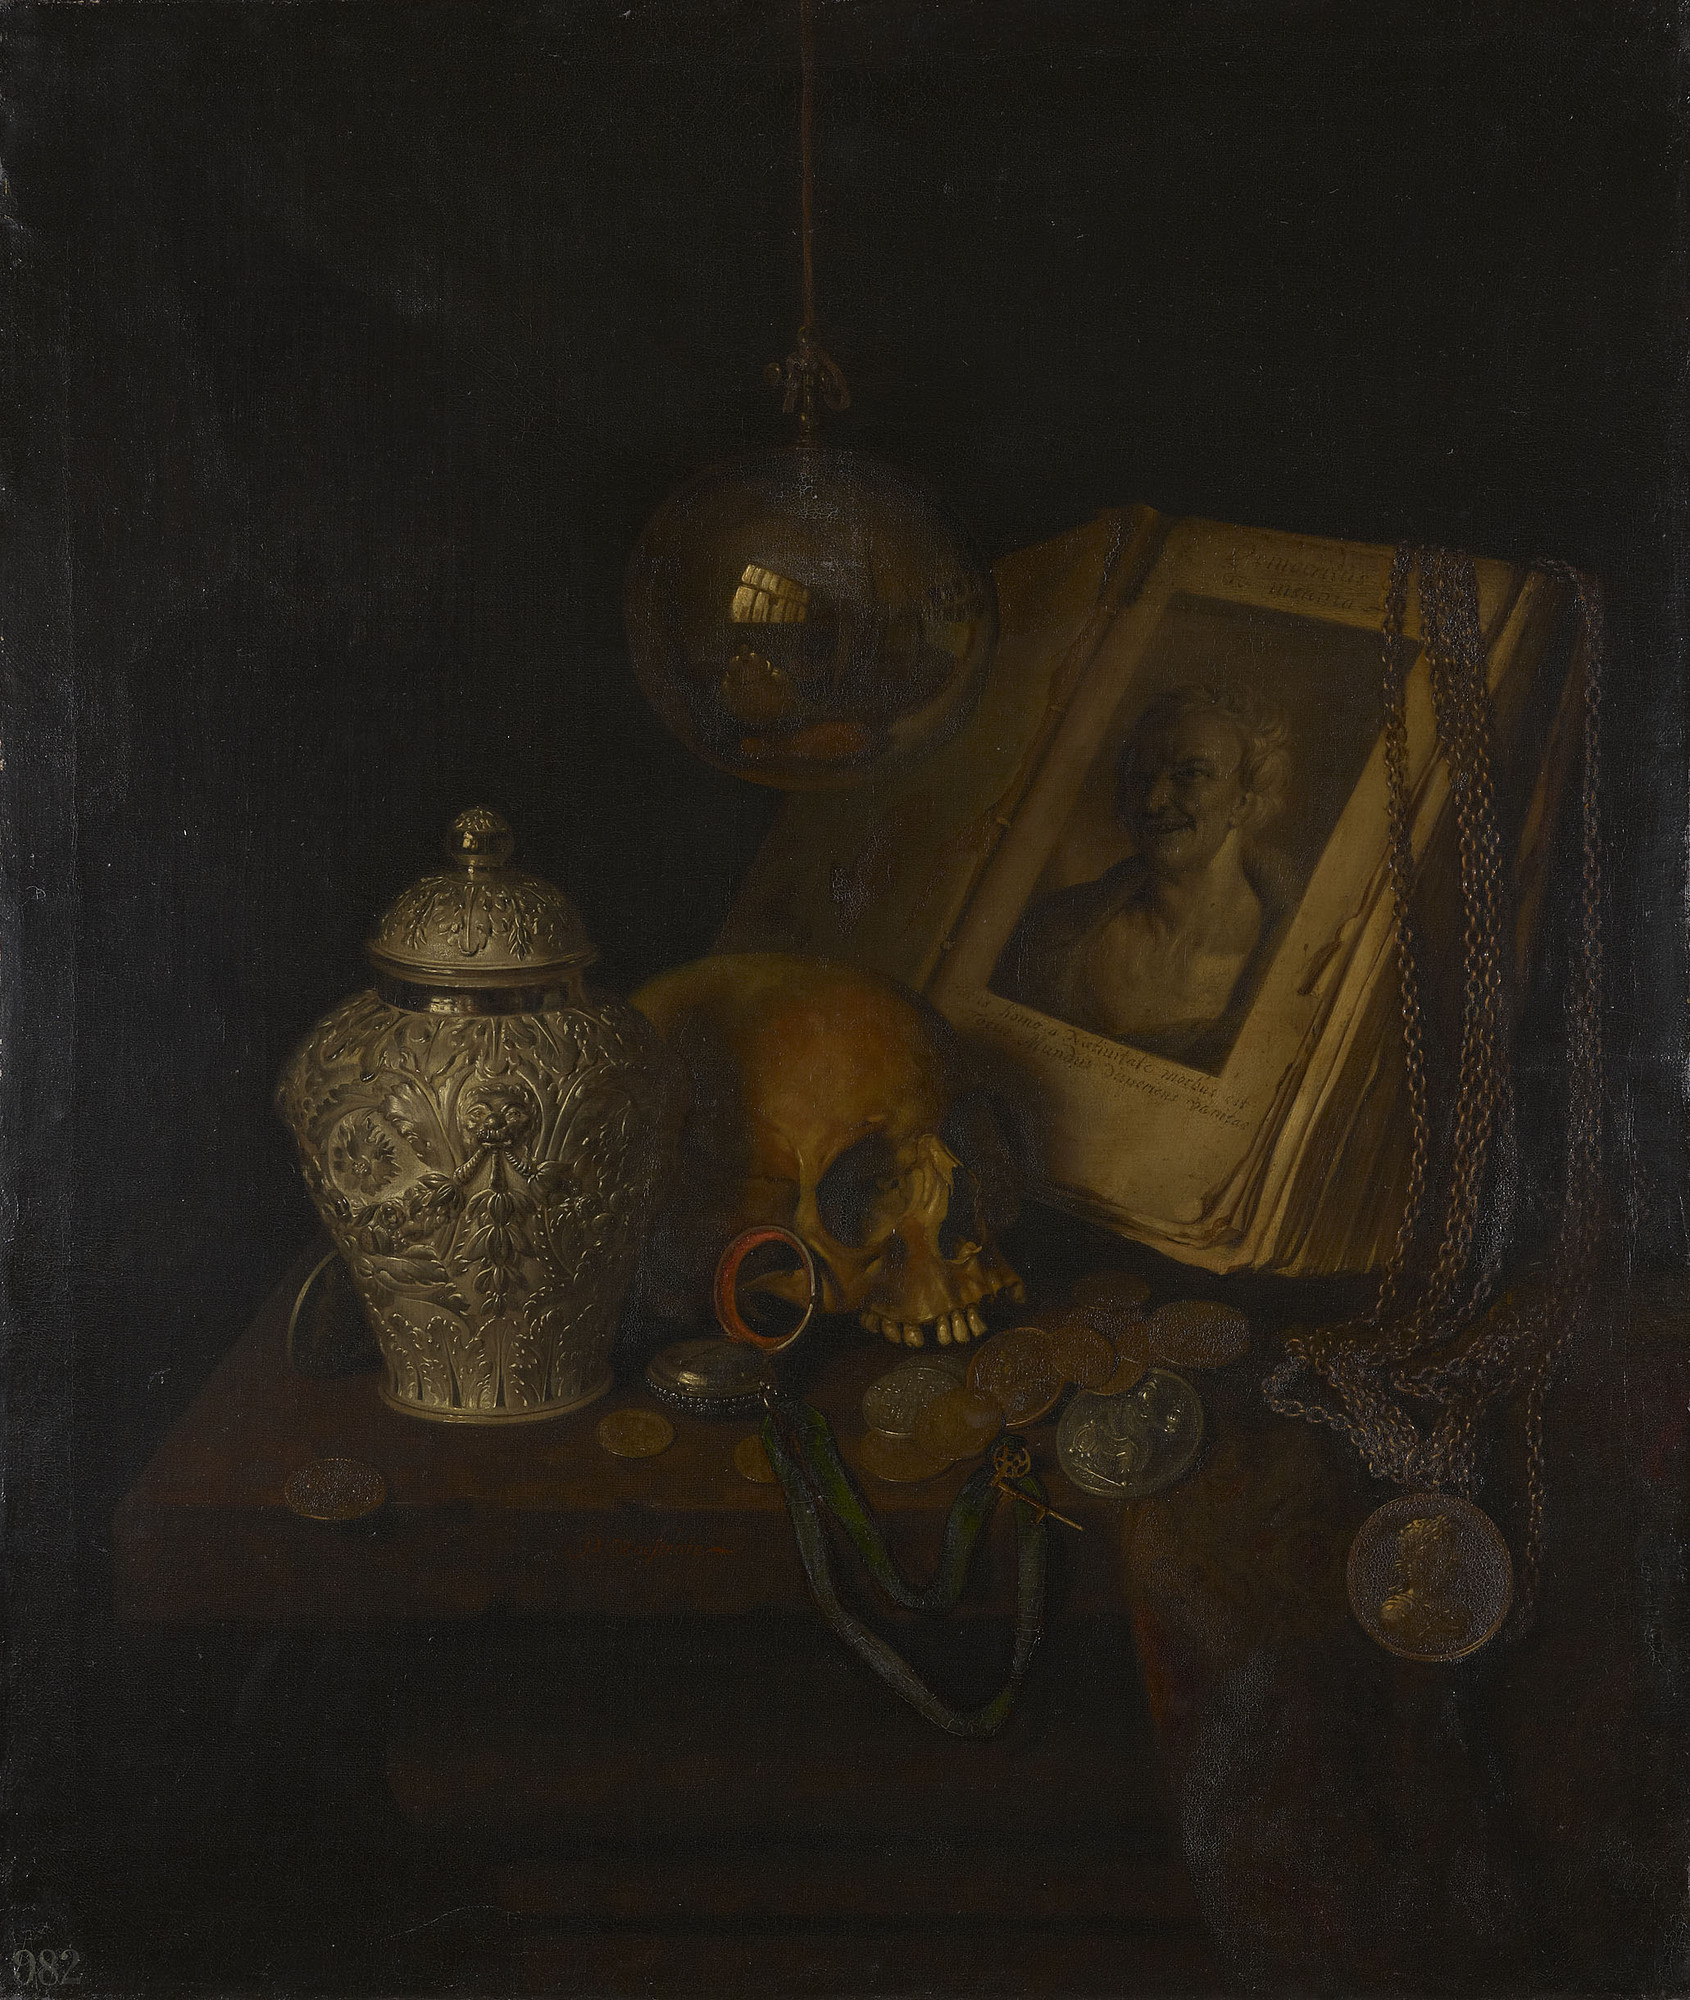 Haarlem low-life genre painter and son-in-law of Frans Hals, Roestraten came to England in 1666 and created a local version of the Dutch 'pronkstilleven' ('still life for show'), with prominence given to English silver. 

The Vanitas is a subject so uni